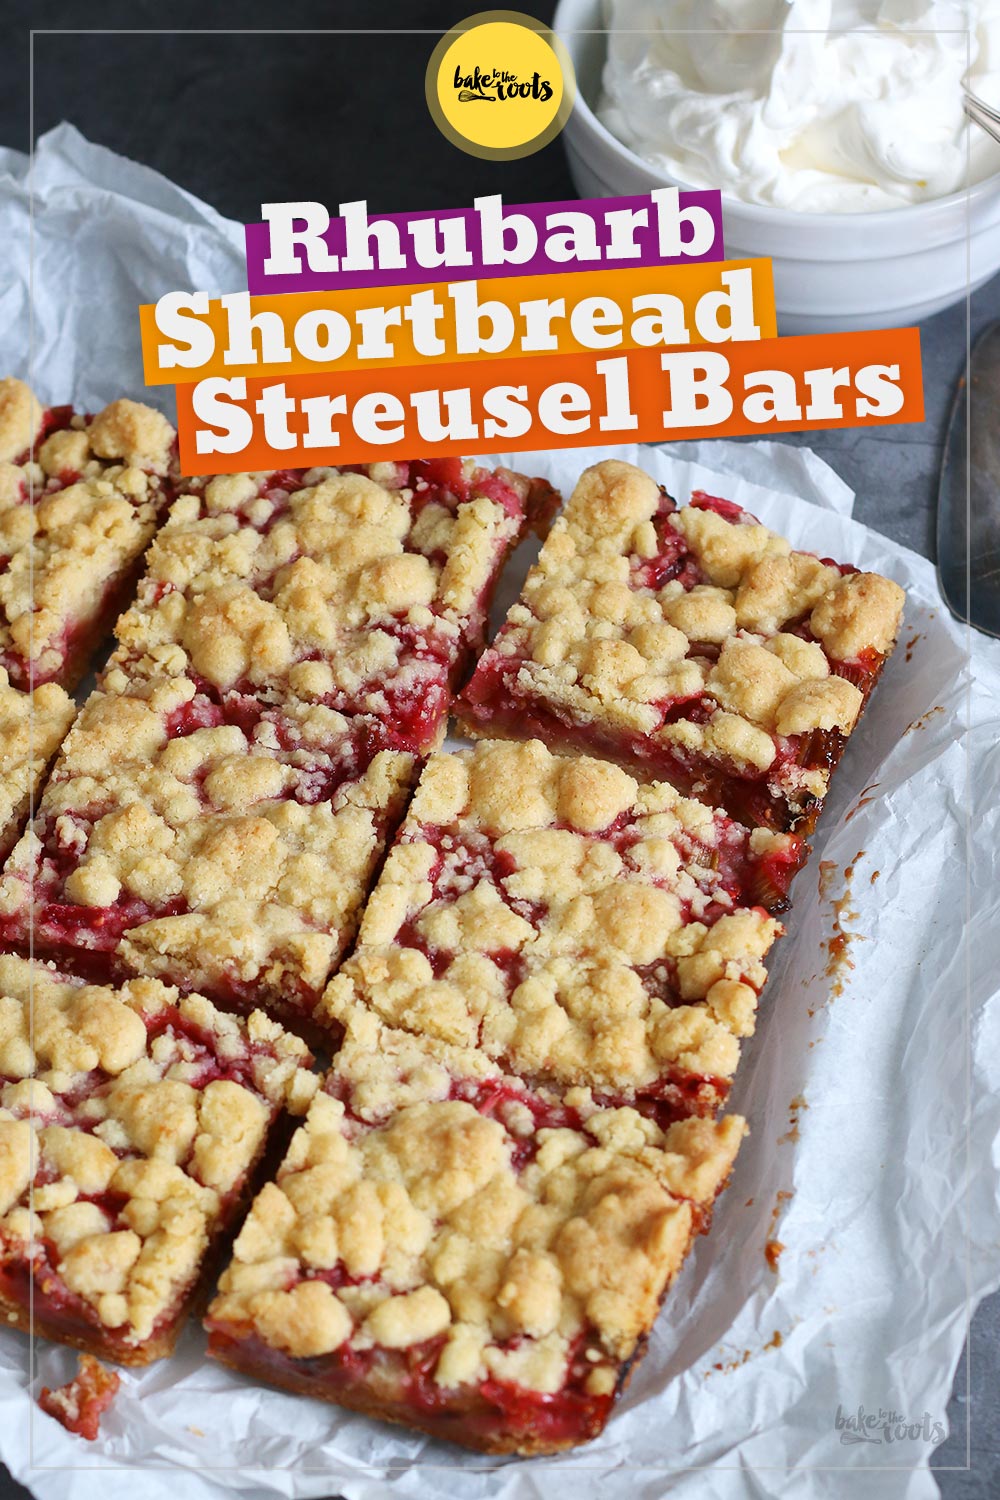 Rhubarb Shortbread Streusel Bars | Bake to the roots